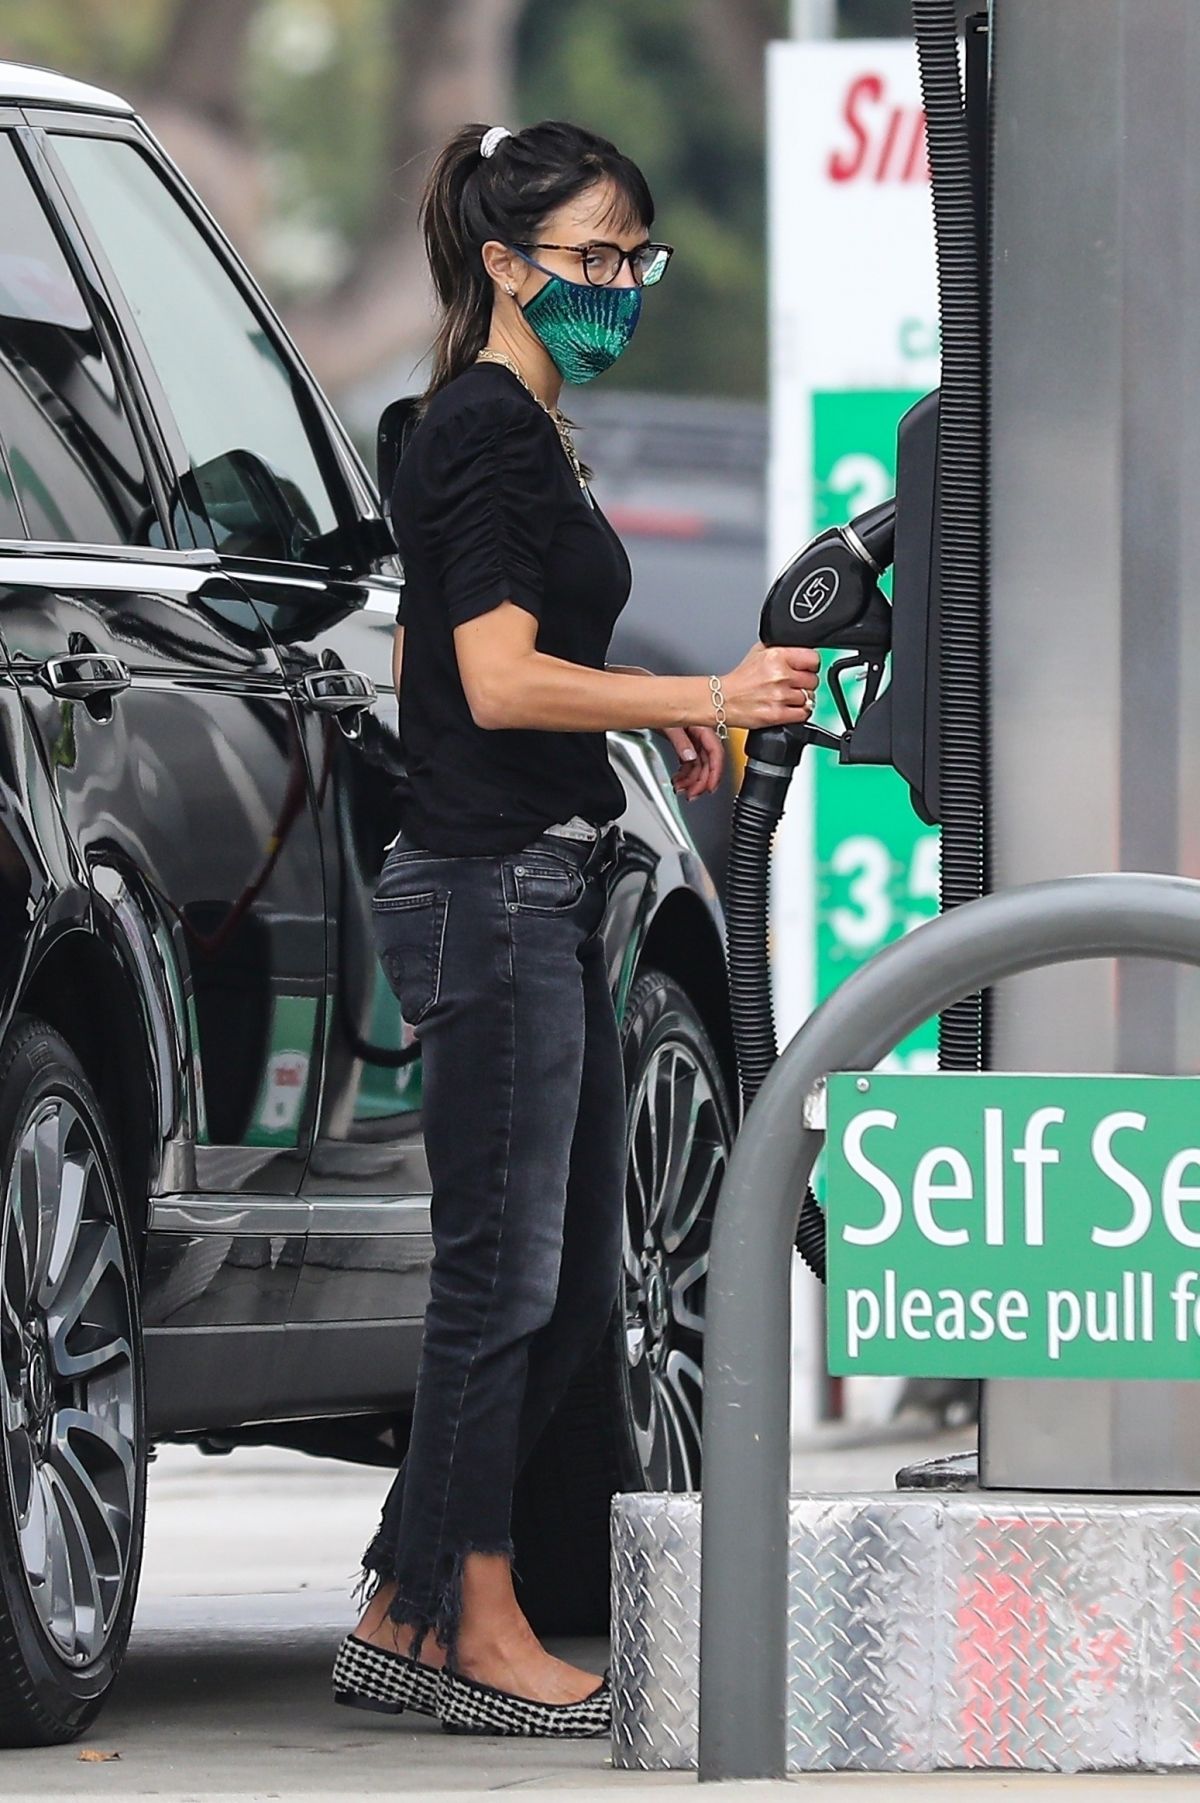 JORDANA BREWSTER at a Gas Station in Brentwood 10/08/2020 – HawtCelebs